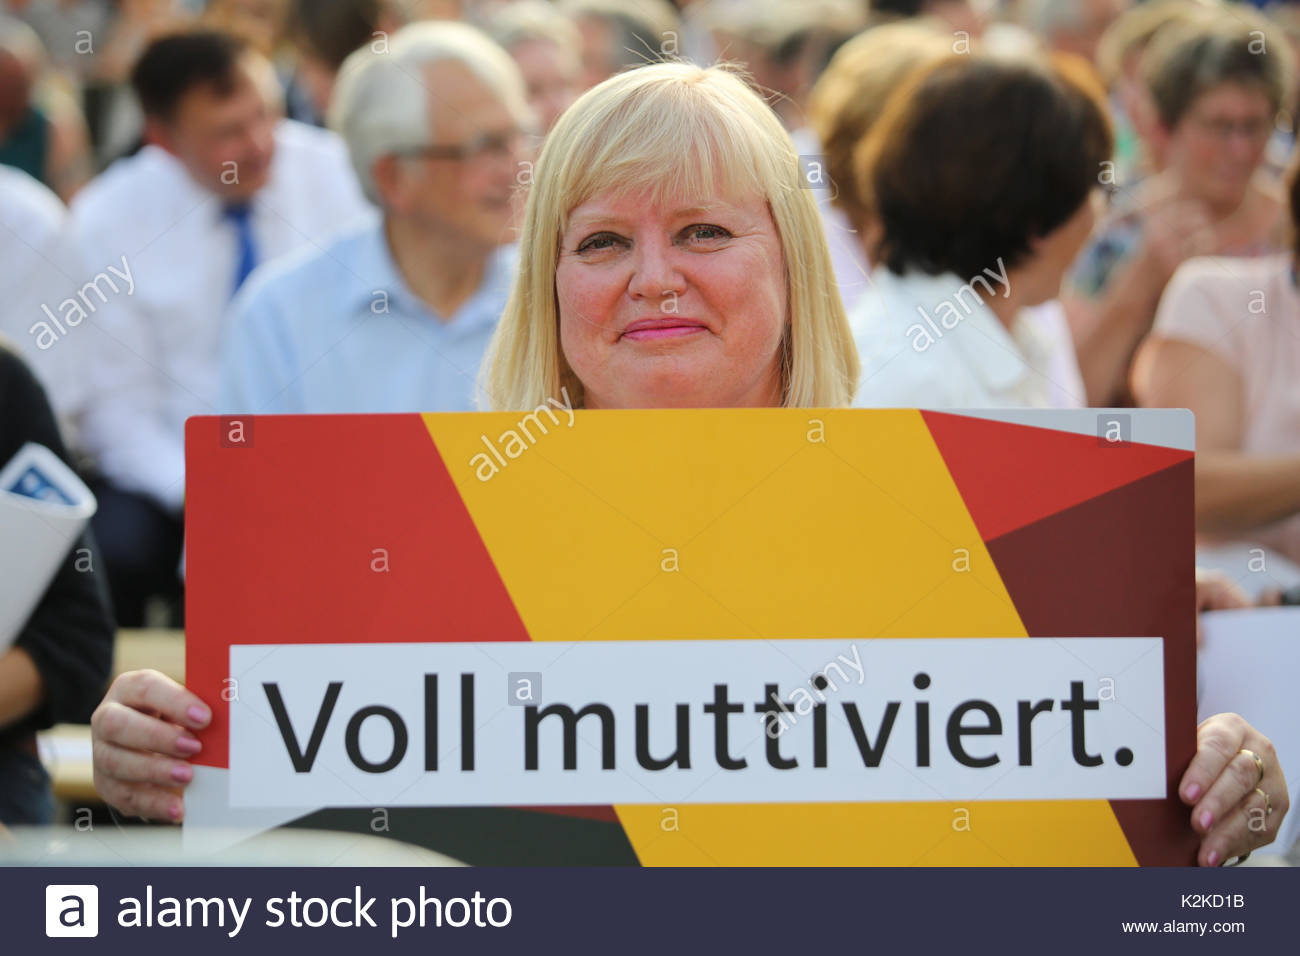 A clever gesture of support as a member of the CSU party in Erlangen, Germany, waits to hear Angela Merkel speak. Merkel is currently on the campaign  trail in the run up to the German election.The pun in the slogan refers to the German words for mother and motivated.Loosely translated it reads as 'fully mothervated' or 'very mammyvated' though the clever play on the instinctive German word Mutti and the word for motivated can only be fully appreciated in the original. Stock Photo